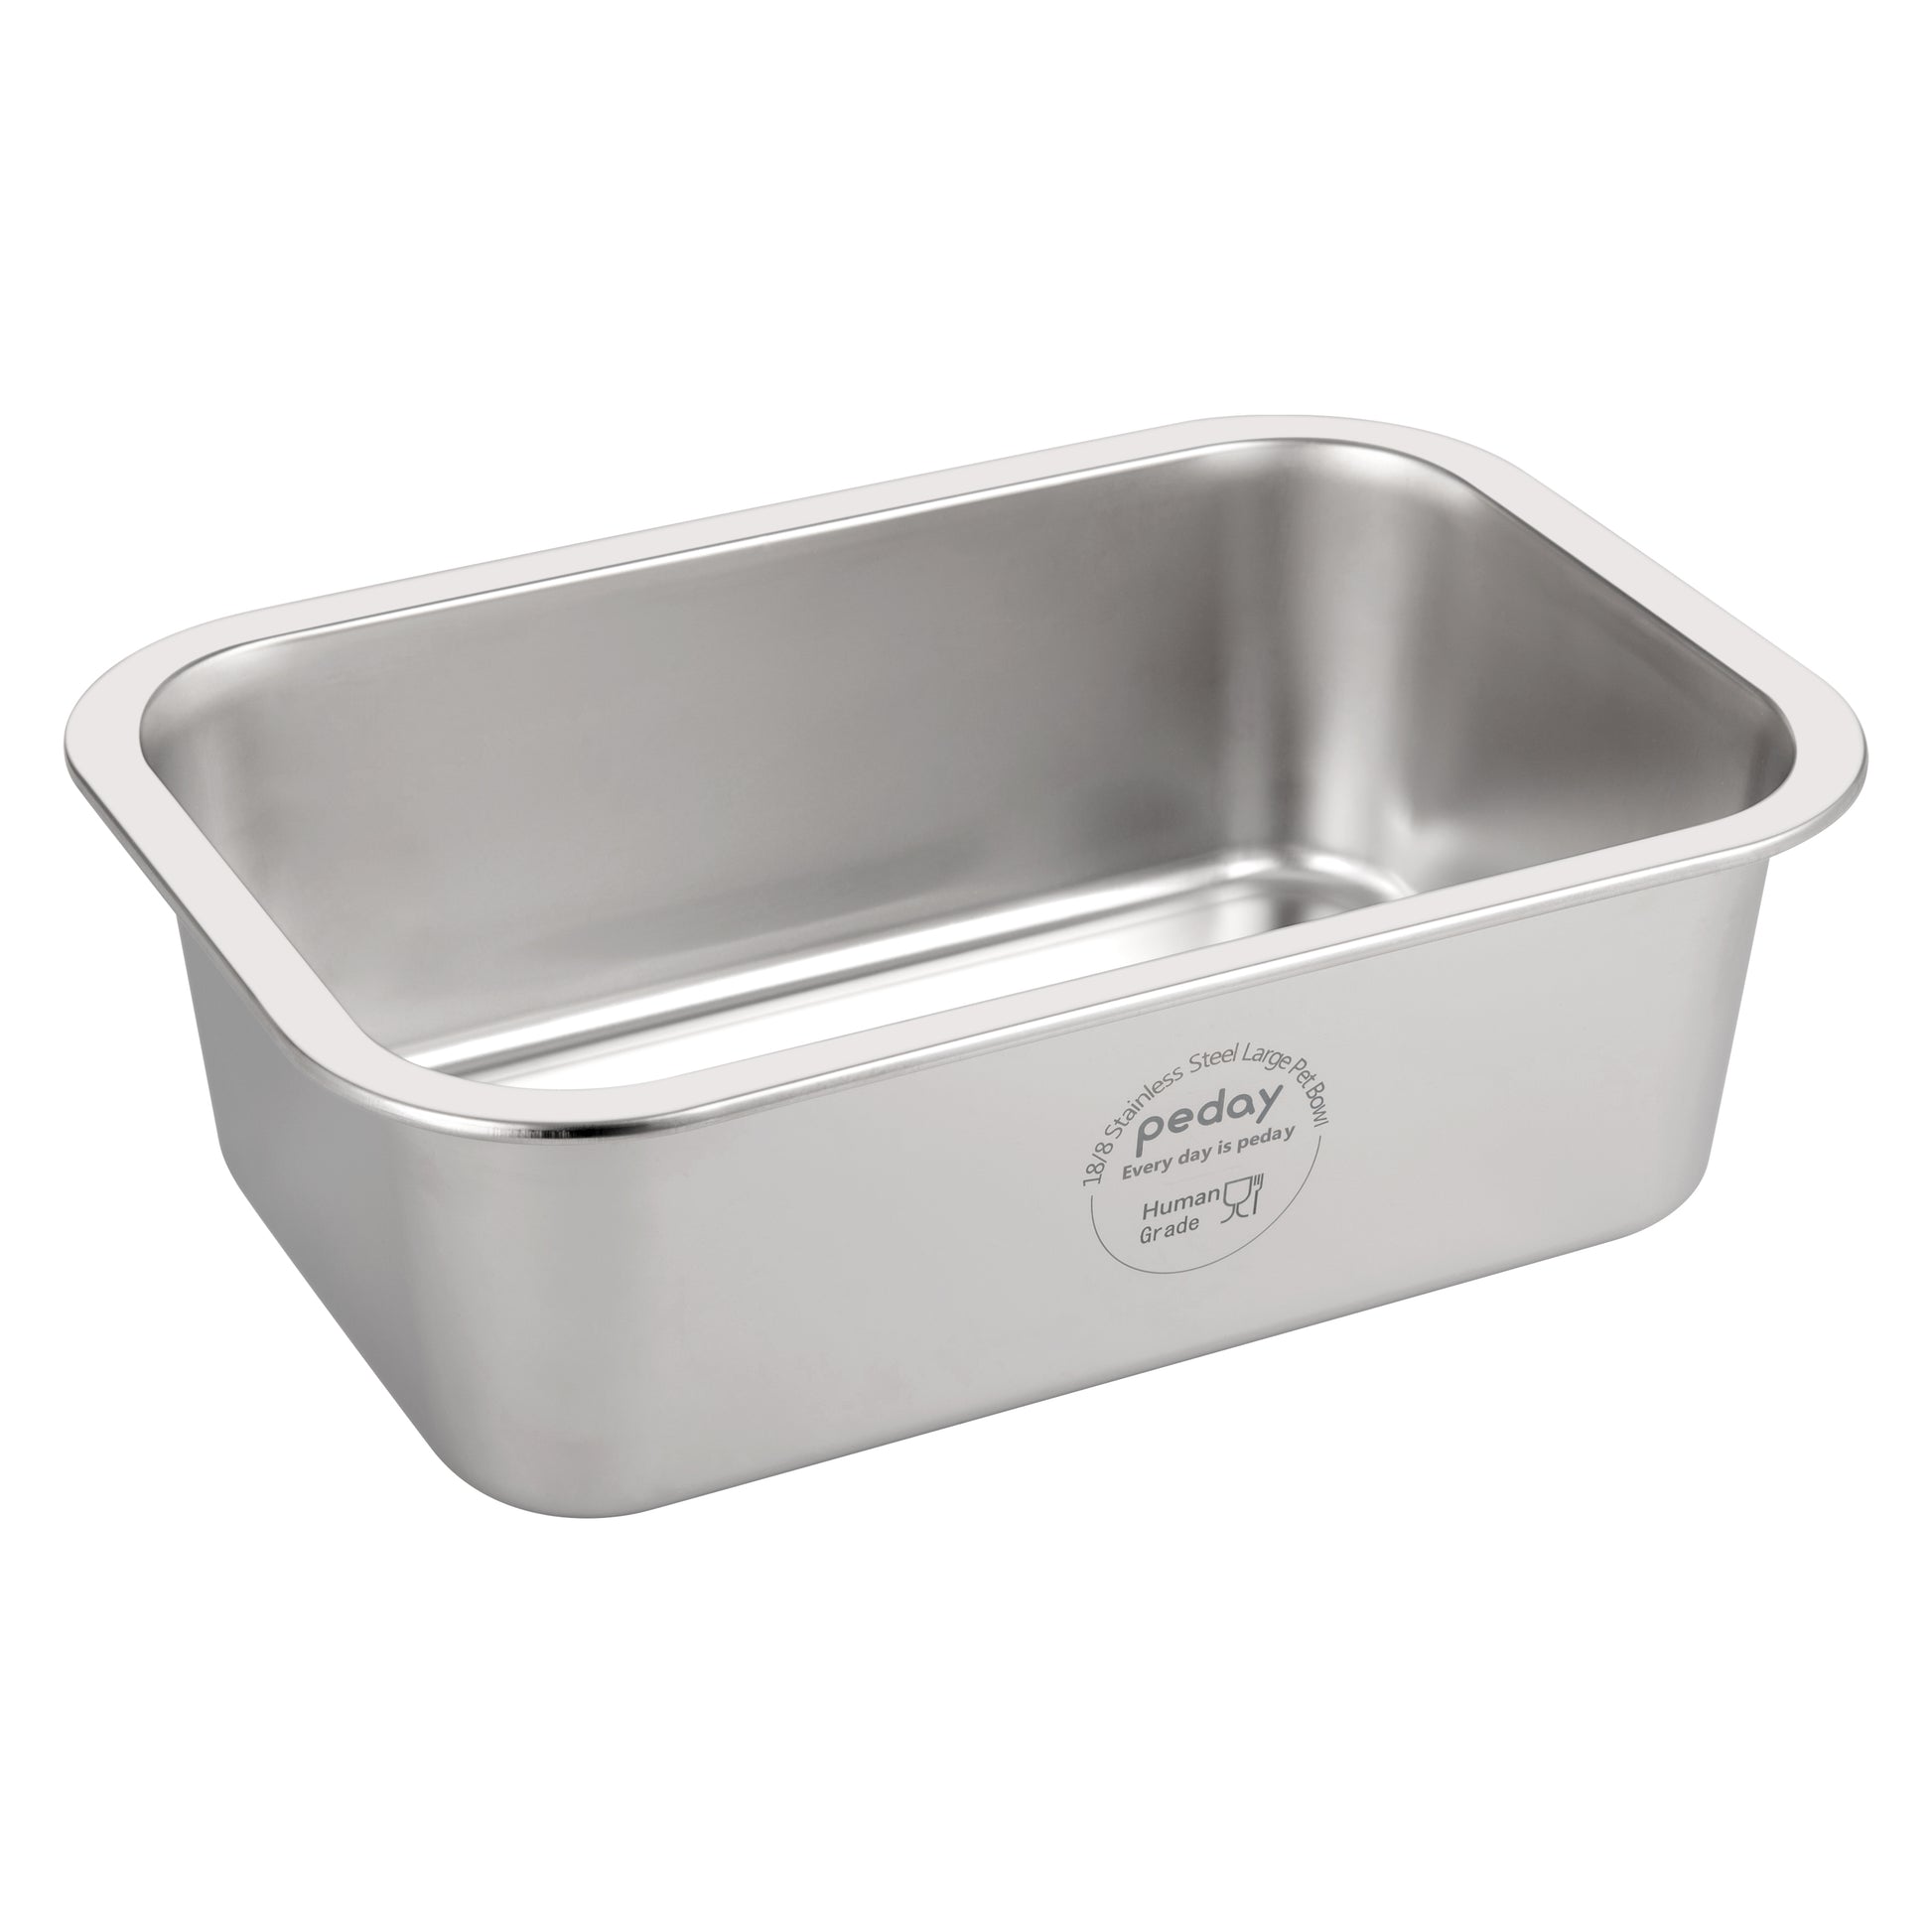 Podinor Dog Water Bowls for Large Dogs - Stainless Steel Dog Food